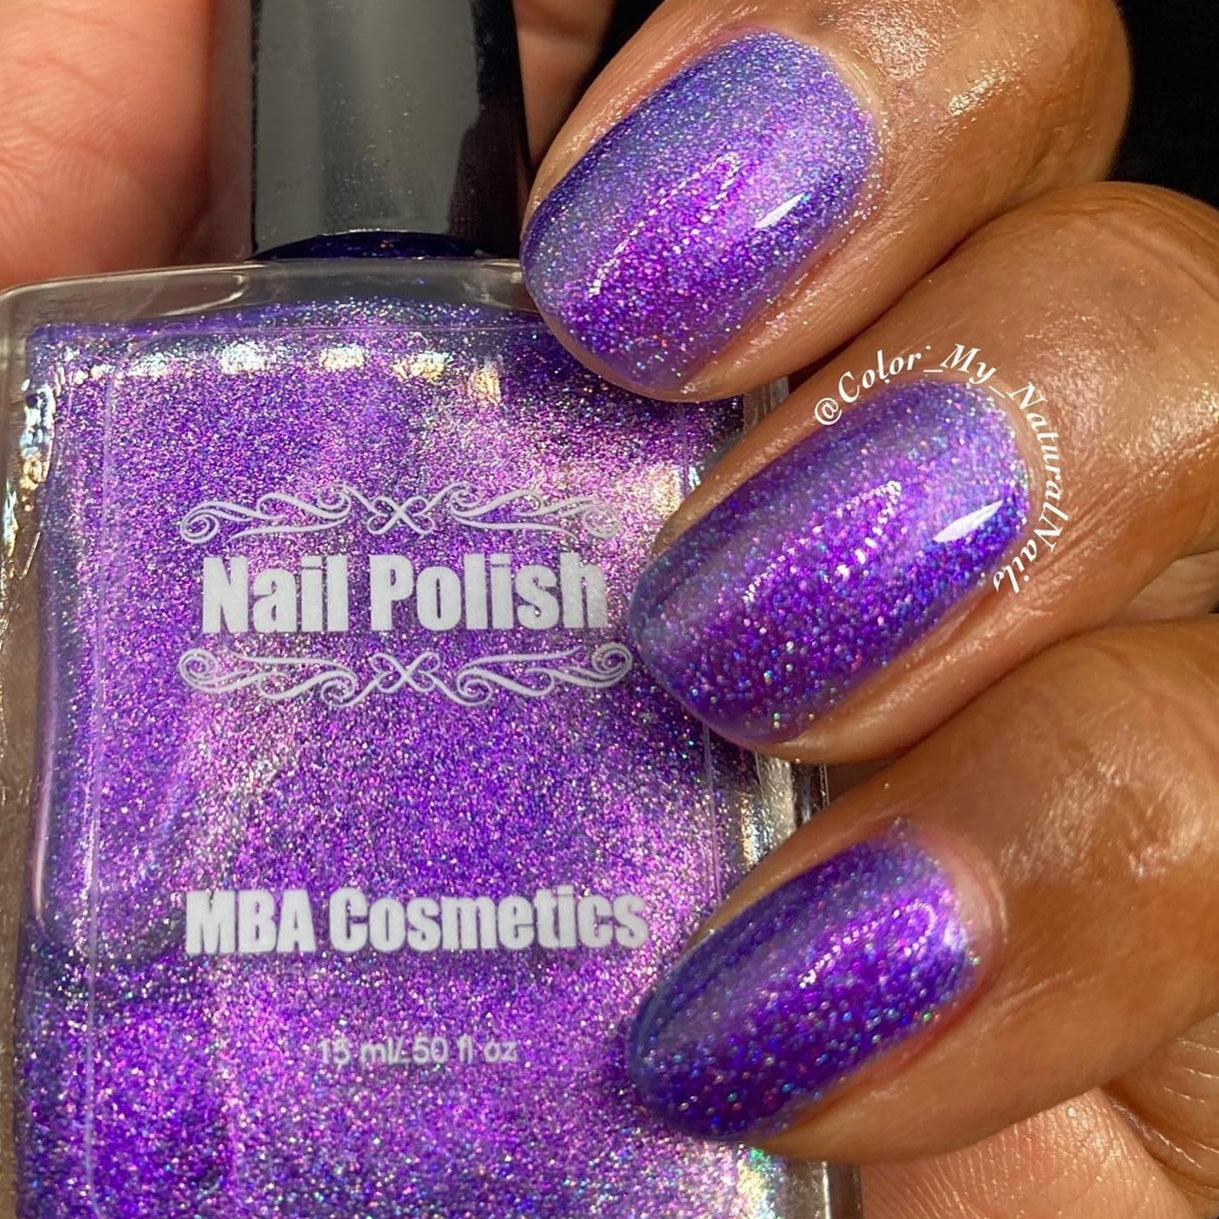 Plum Dandy - Holographic: Plum Purple Holographic Rainbow Custom-Blended Glitter  Nail Polish / Indie Lacquer / Polish Me Silly $11.00